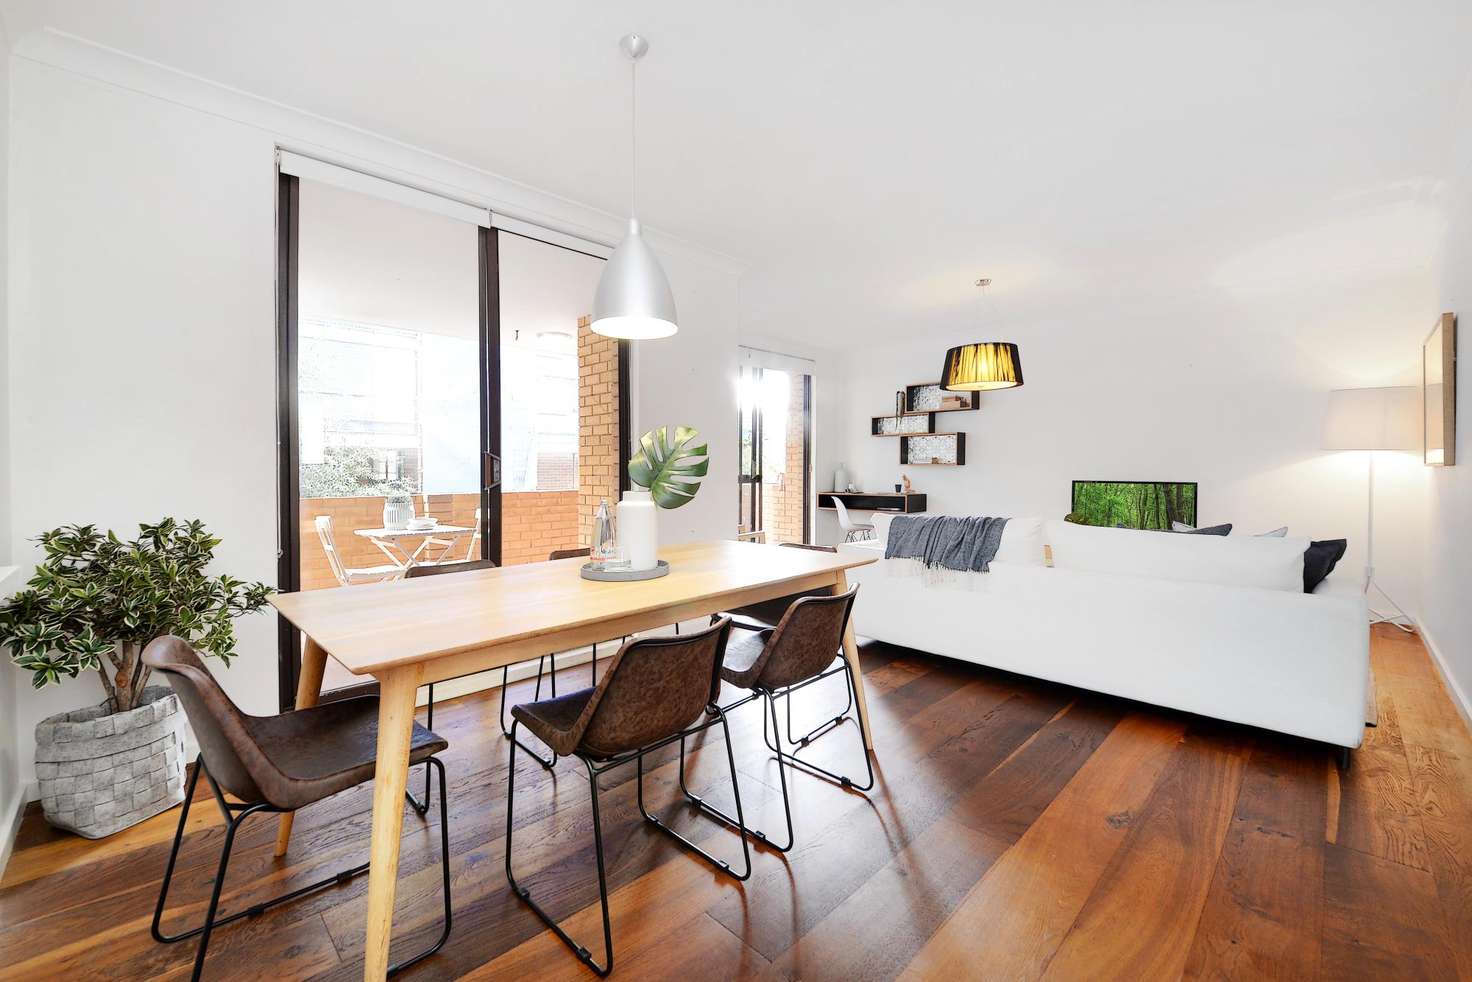 Main view of Homely apartment listing, 8/25 Ocean Street North, Bondi NSW 2026